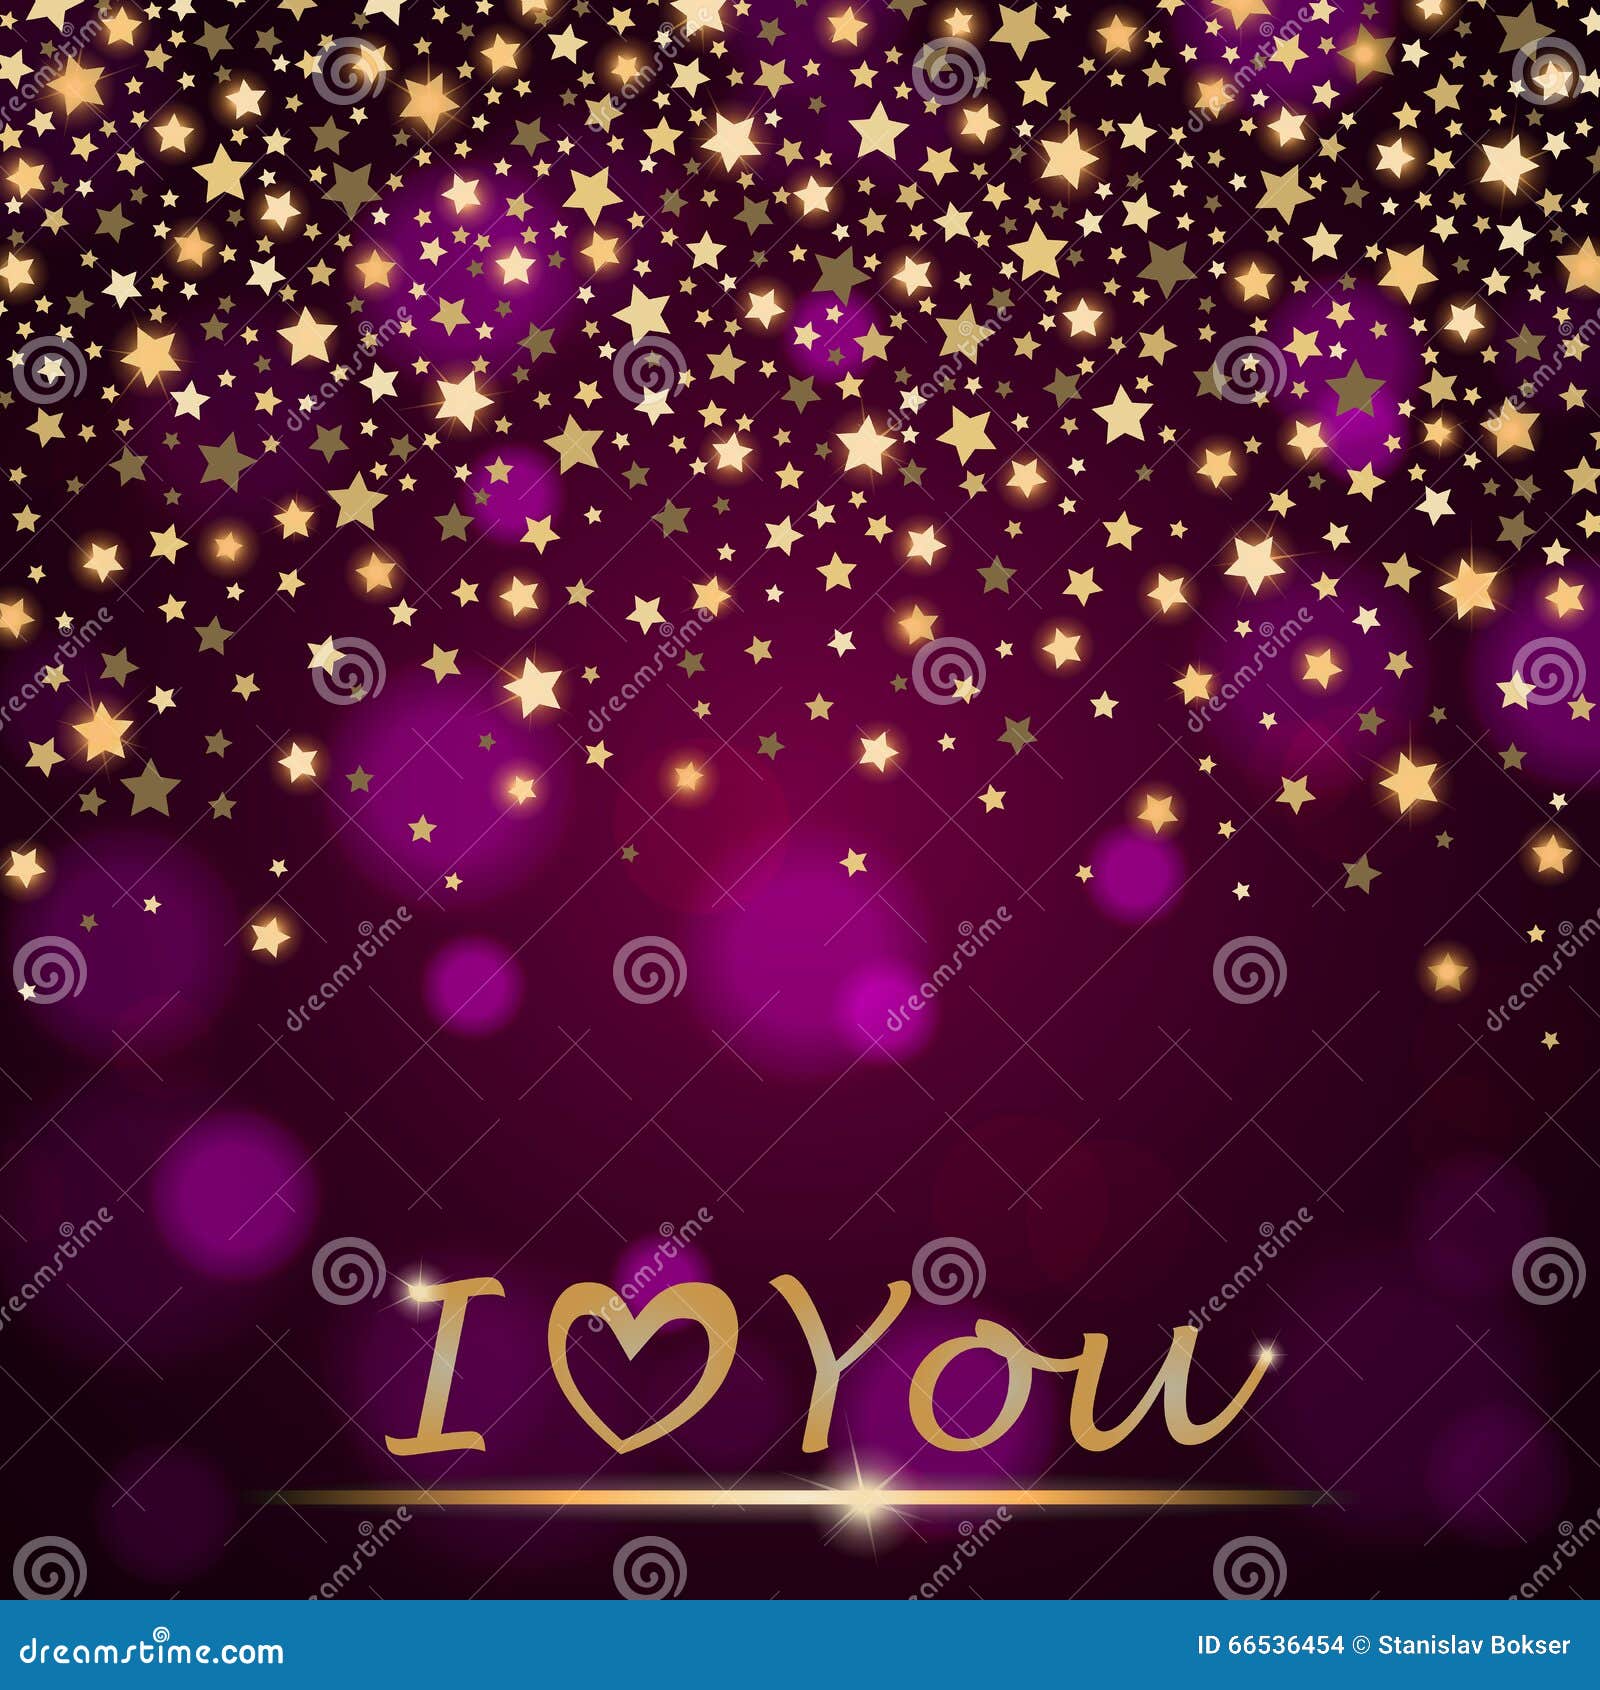  abstract shining falling stars on violet ambient blurred background i love you